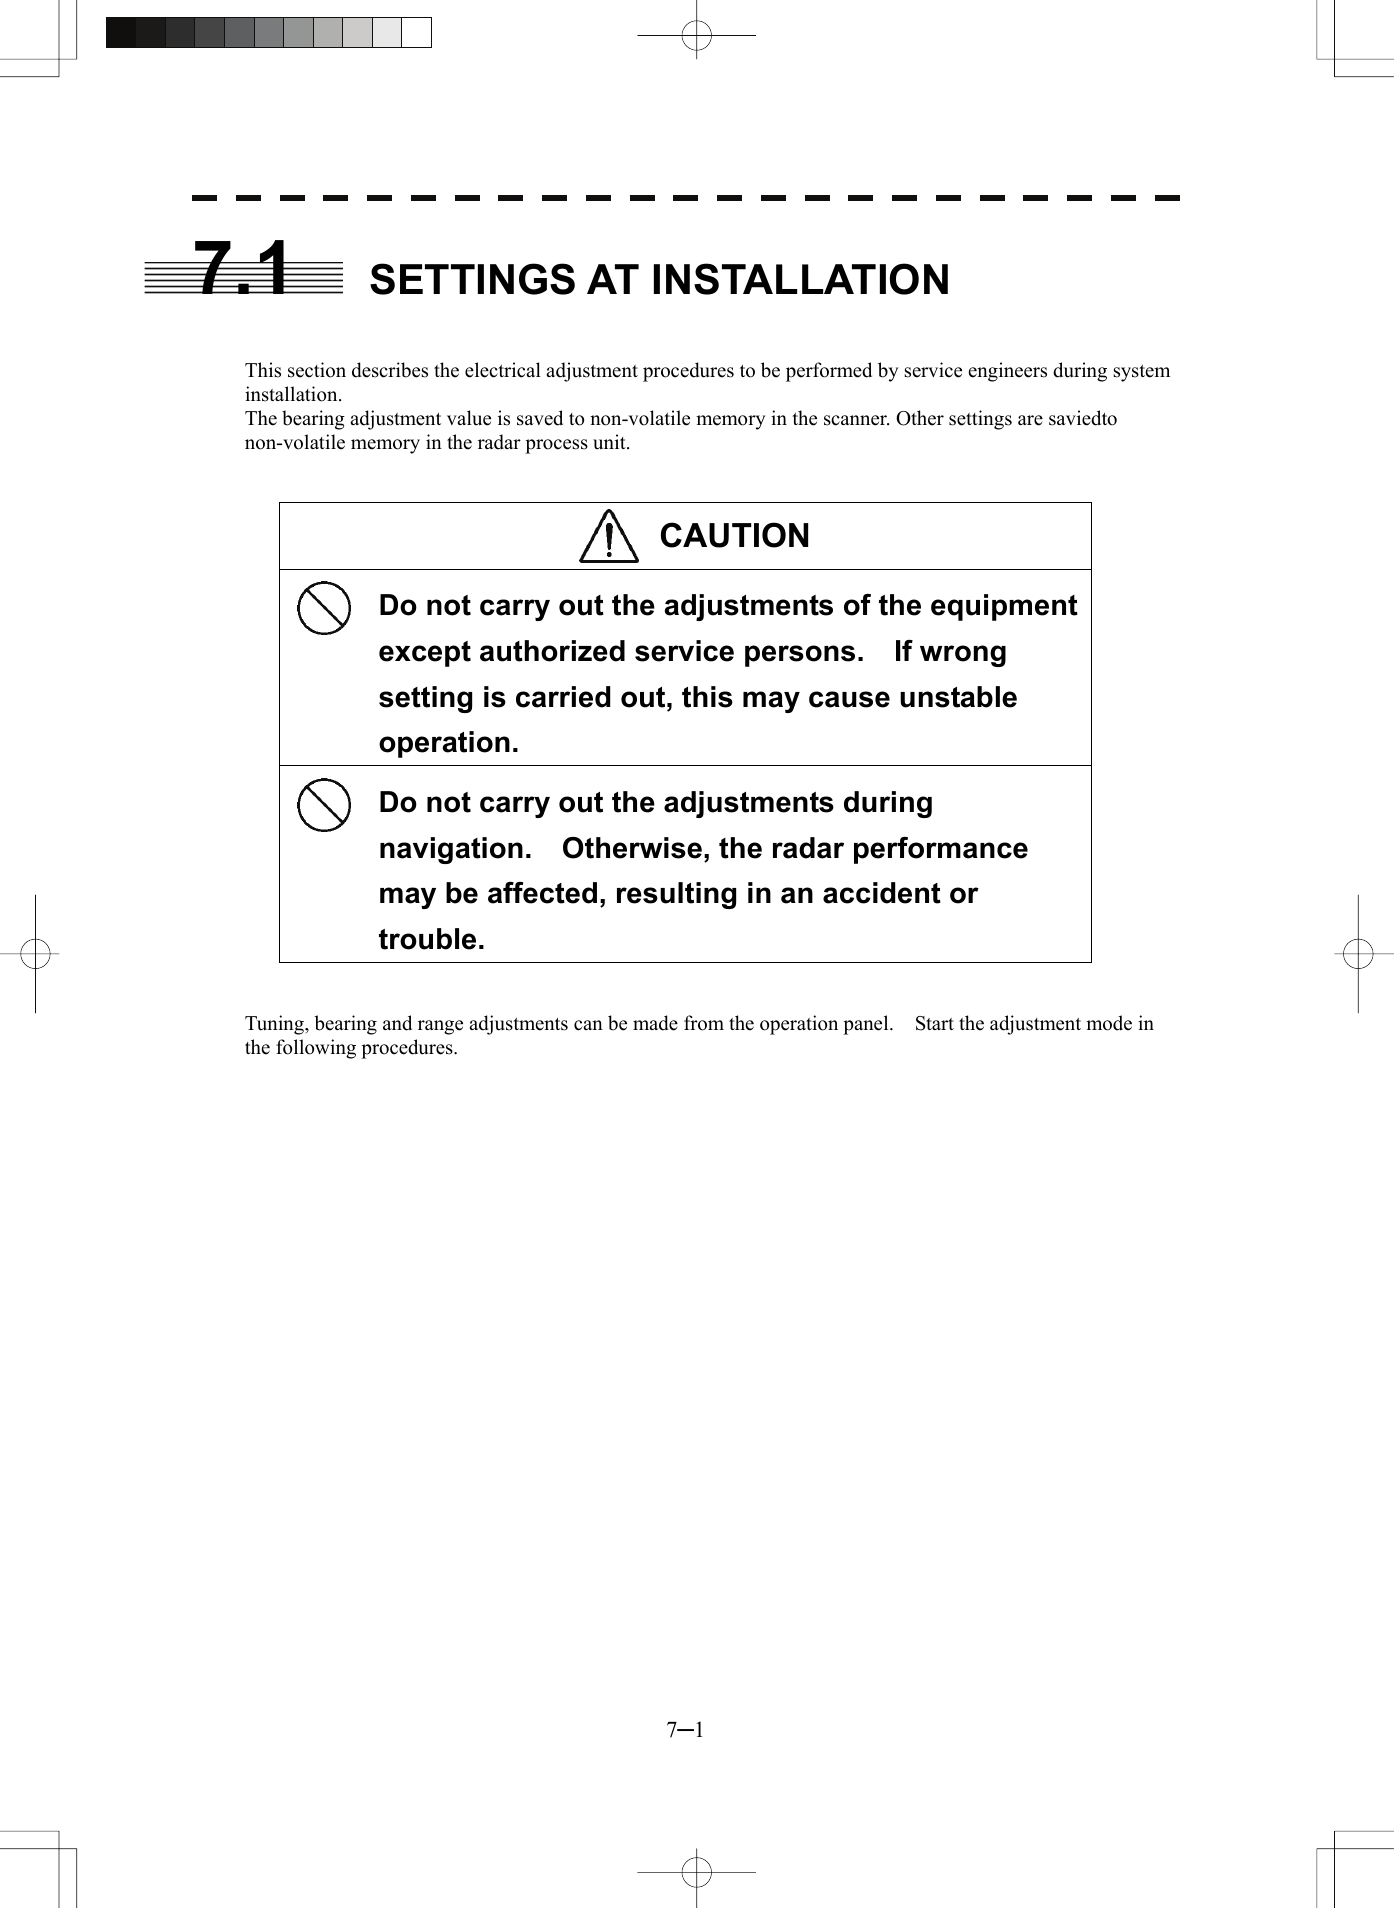  7─1 7.1 SETTINGS AT INSTALLATION   This section describes the electrical adjustment procedures to be performed by service engineers during system installation. The bearing adjustment value is saved to non-volatile memory in the scanner. Other settings are saviedto non-volatile memory in the radar process unit.   CAUTION    Do not carry out the adjustments of the equipment except authorized service persons.    If wrong setting is carried out, this may cause unstable operation.    Do not carry out the adjustments during navigation.    Otherwise, the radar performance may be affected, resulting in an accident or trouble.   Tuning, bearing and range adjustments can be made from the operation panel.    Start the adjustment mode in the following procedures.    